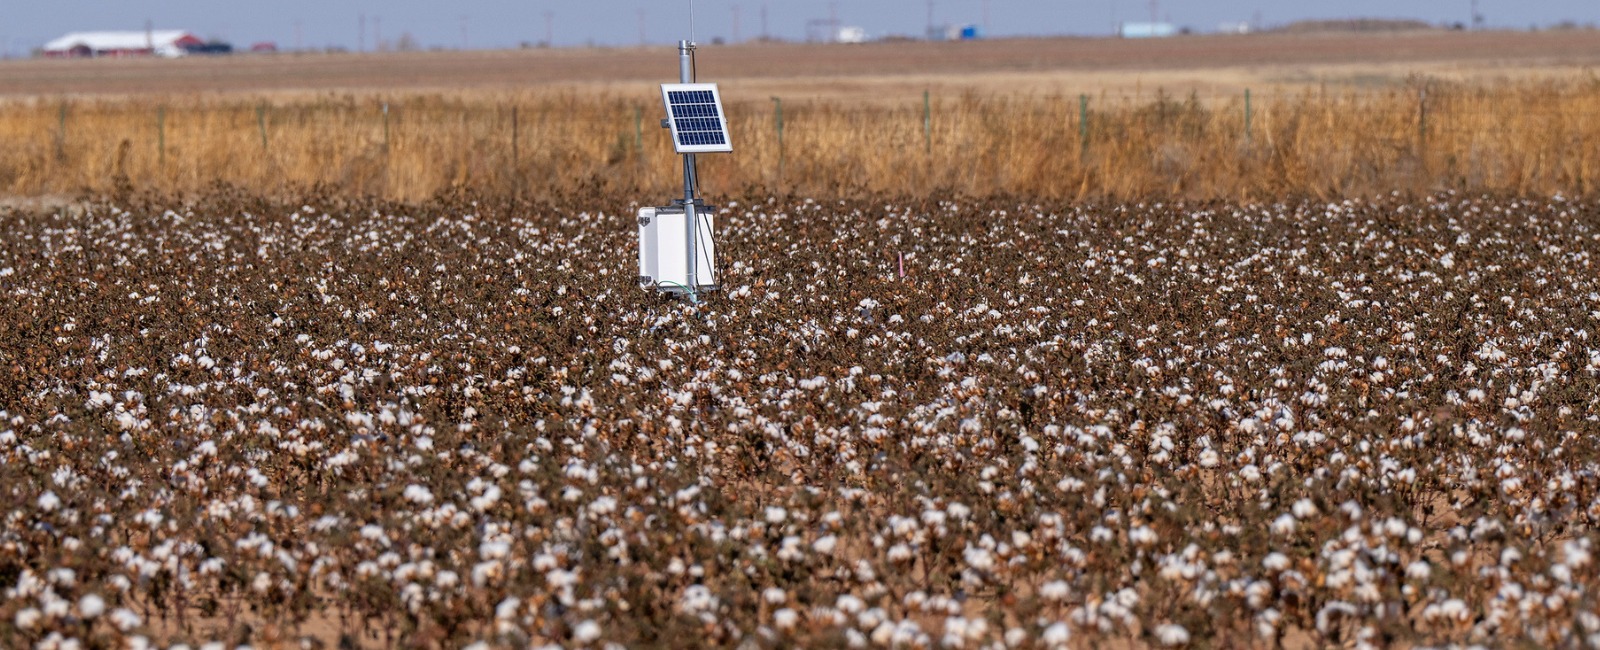 Wide shot of a single solar panel structure in the middle of a vast cotton field